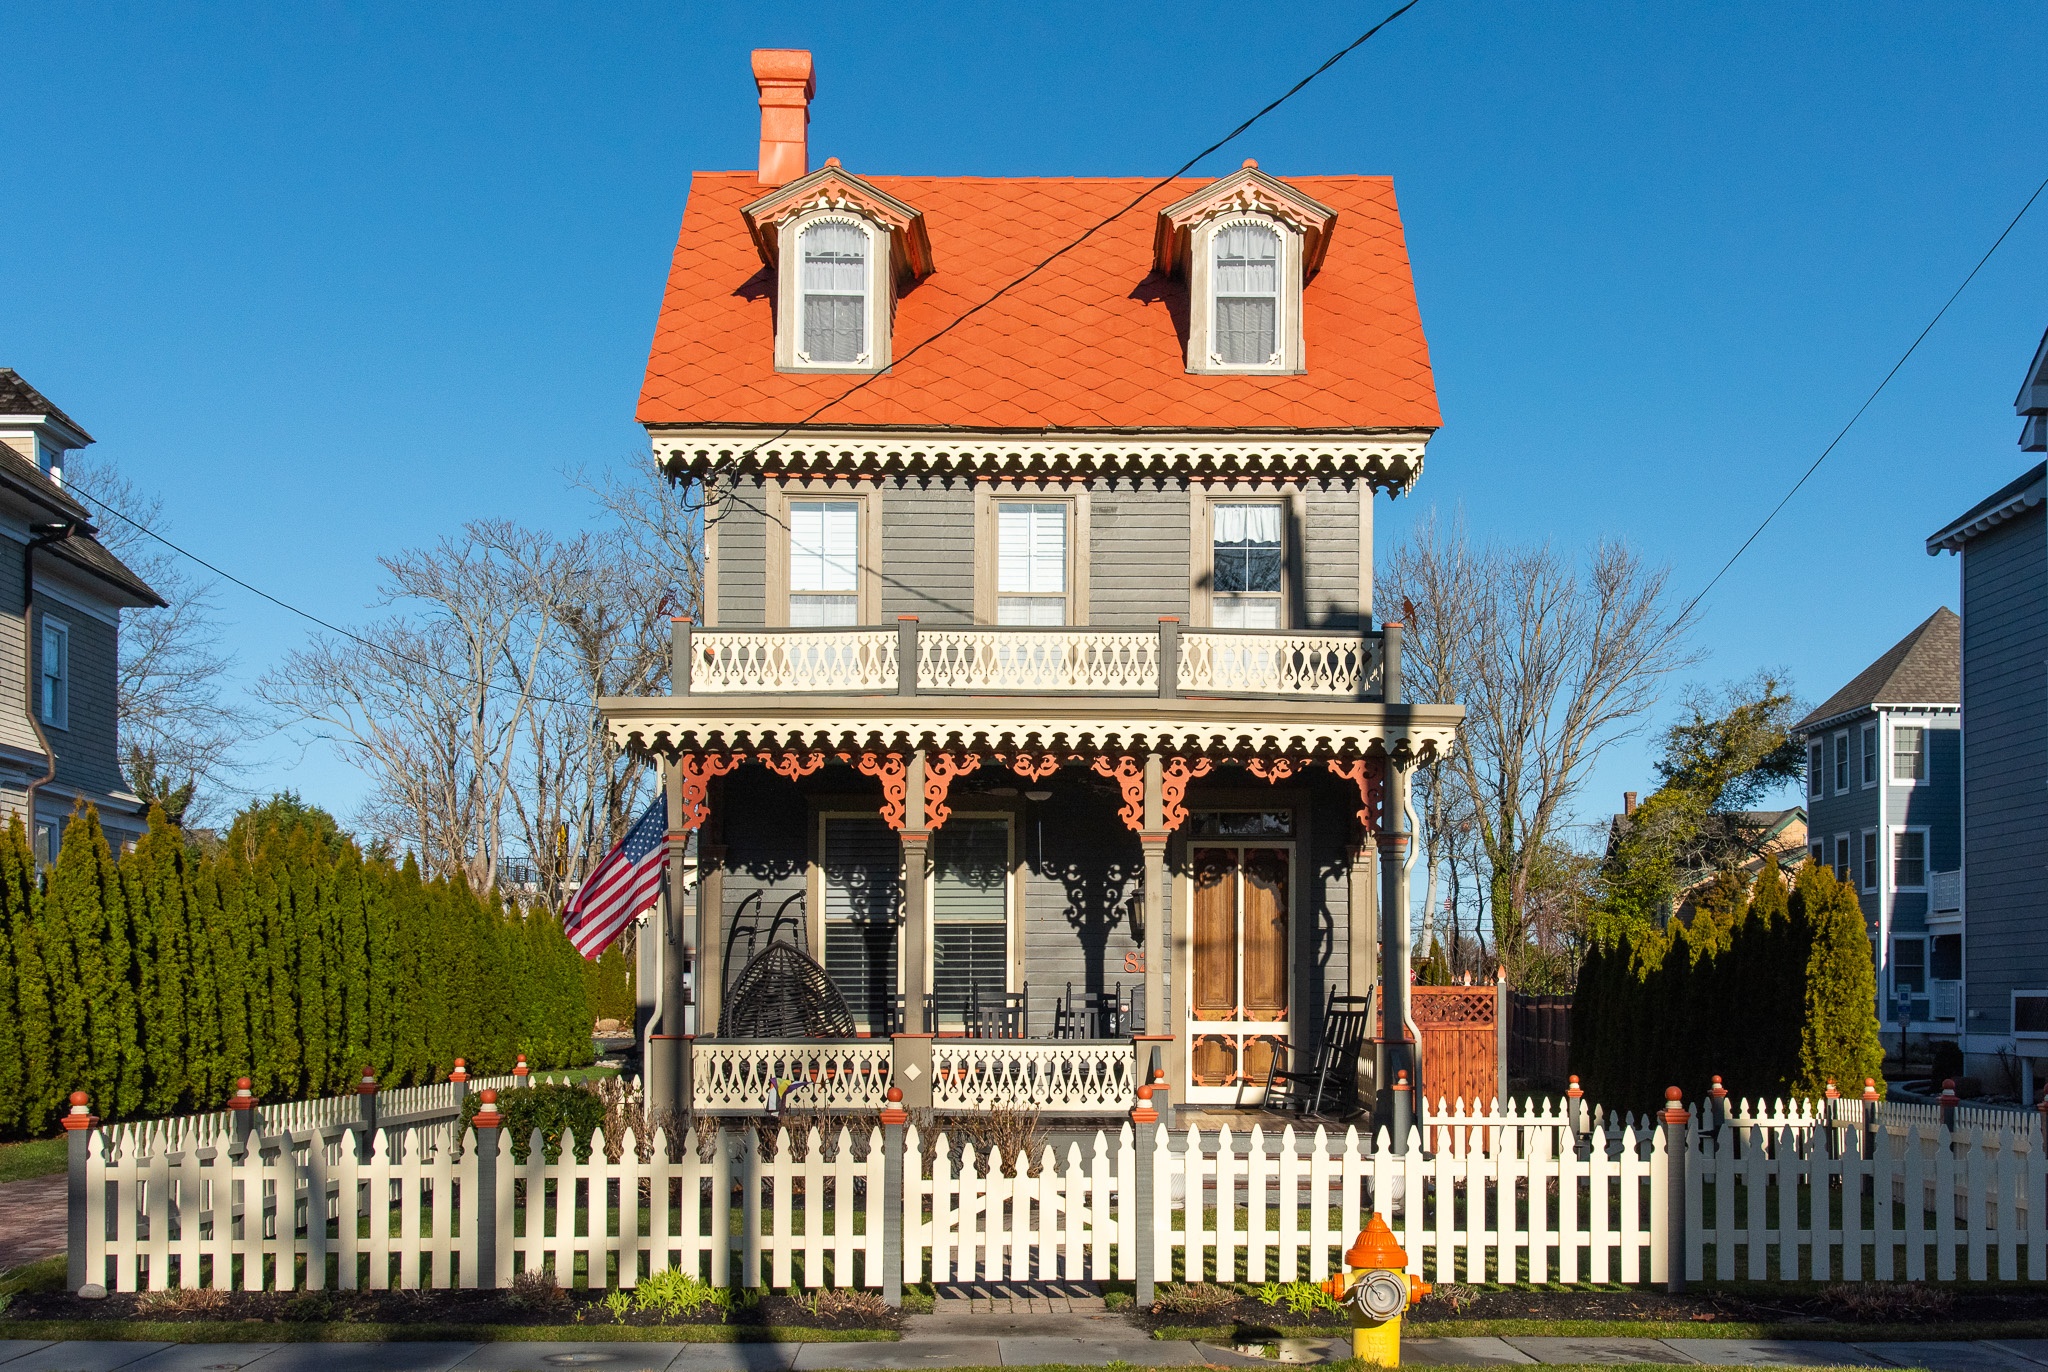 Escape Back in Time with this cute house on Washington Street